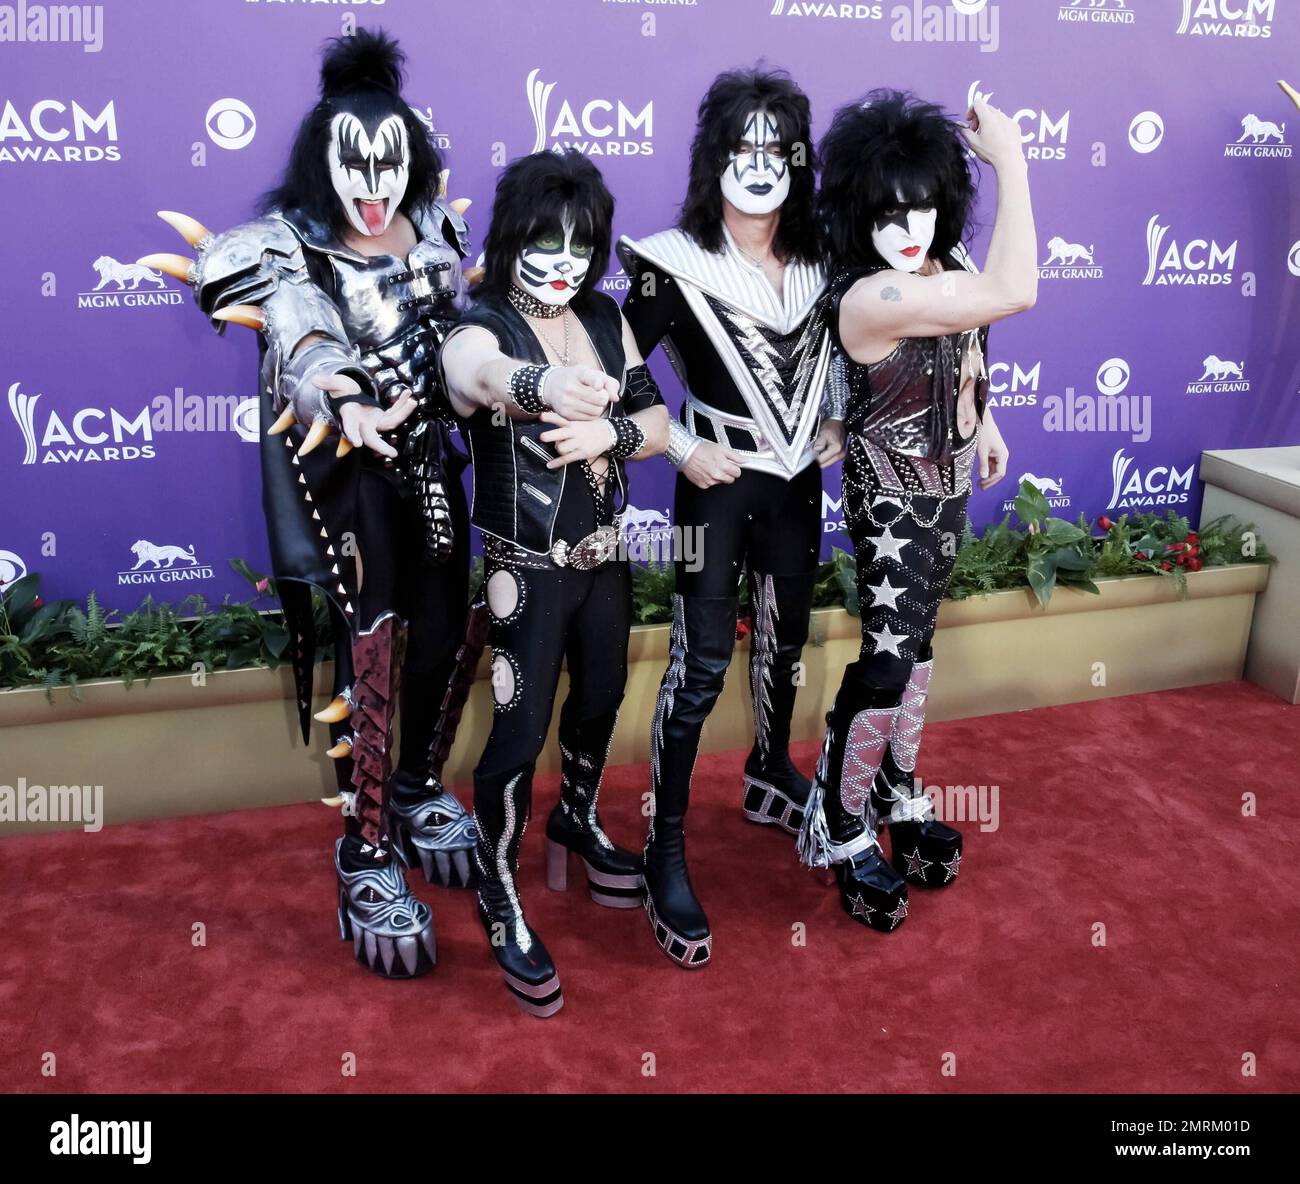 Gene Simmons, Eric Singer, Tommy Thayer and Paul Stanley of the metal band 'Kiss' arrives at the Academy of Country Music Awards held at the MGM Resort & Casino. Las Vegas, NV. 1st April 2012. Stock Photo